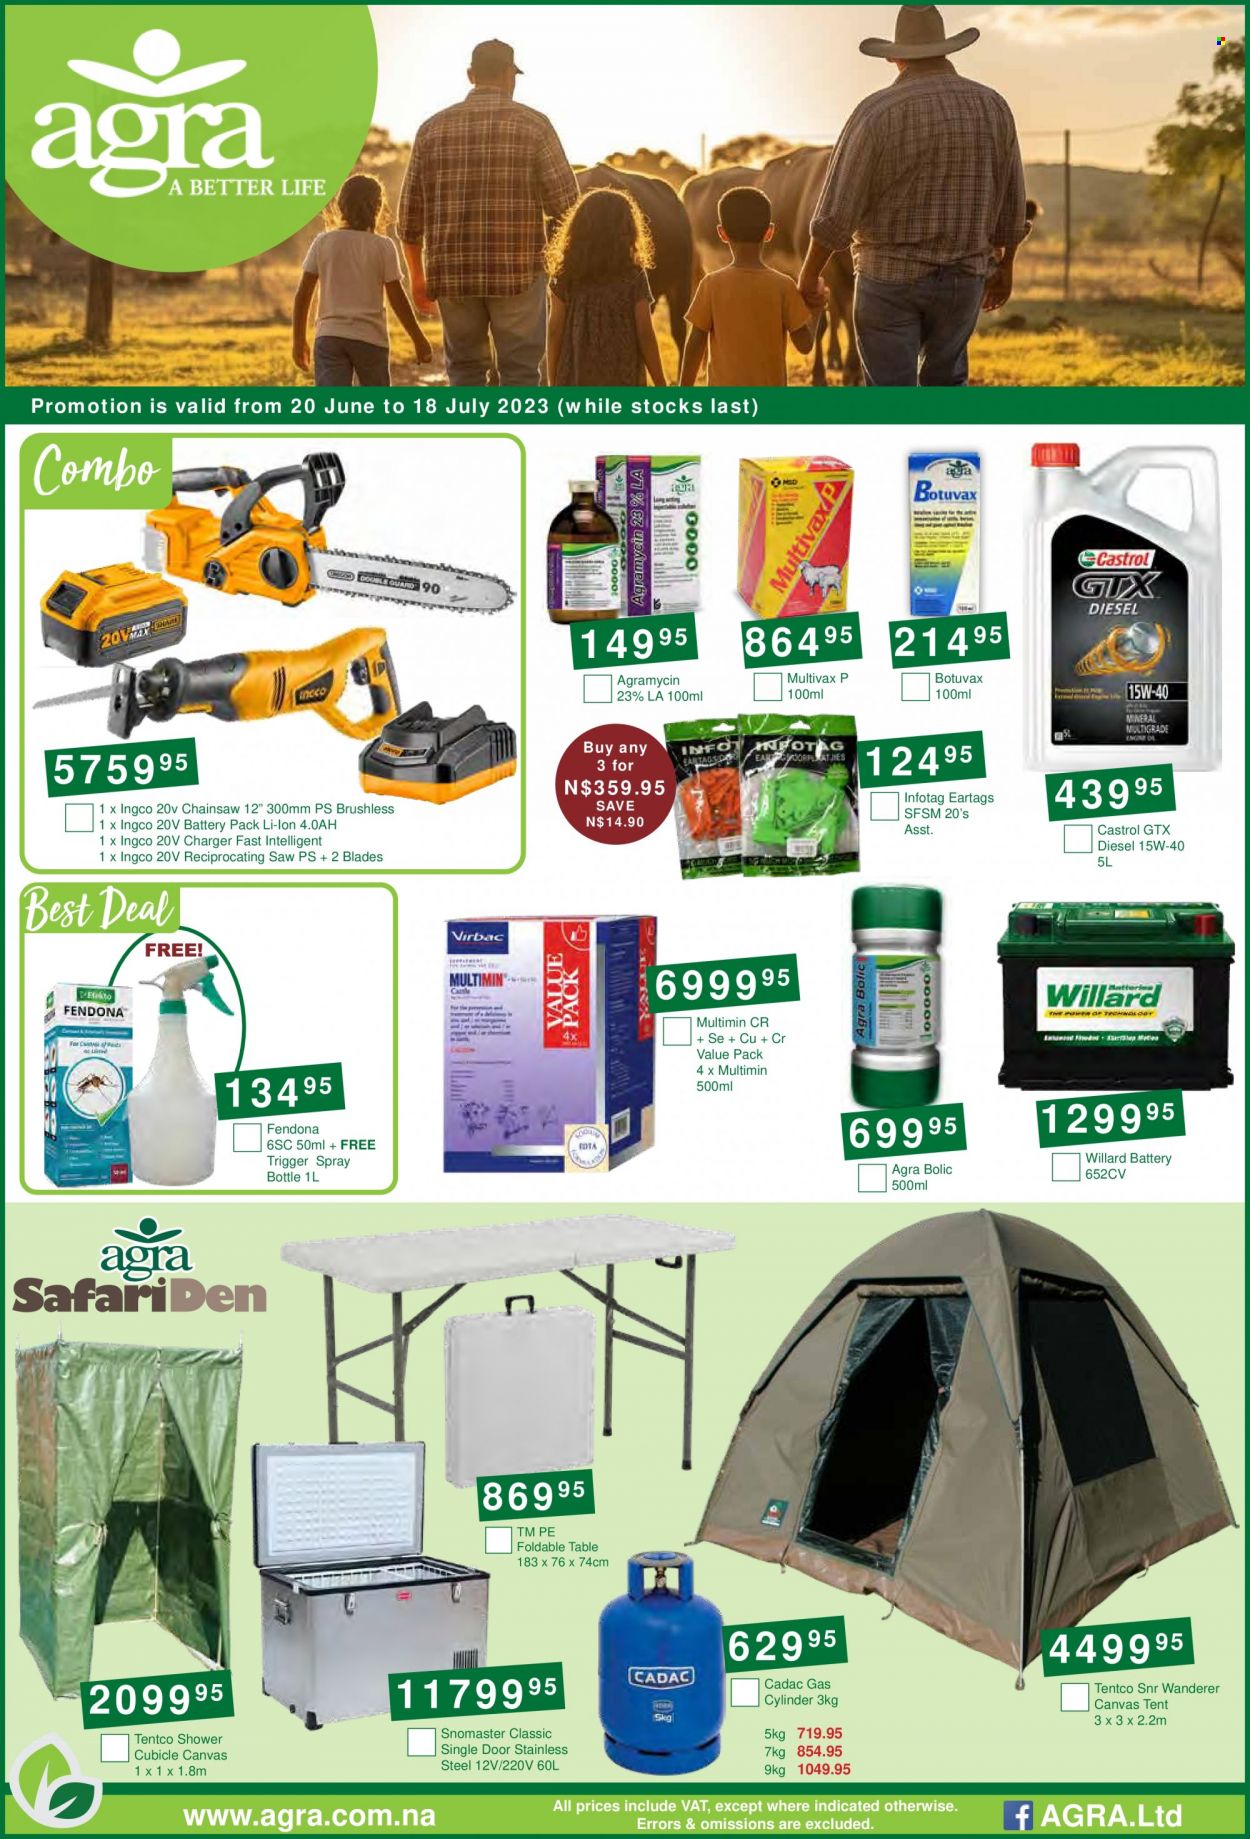 Agra catalogue  - 20/06/2023 - 18/07/2023 - Sales products - Willard, canvas, door, chain saw, saw, reciprocating saw, table, gas cylinder, Castrol, tent. Page 1.